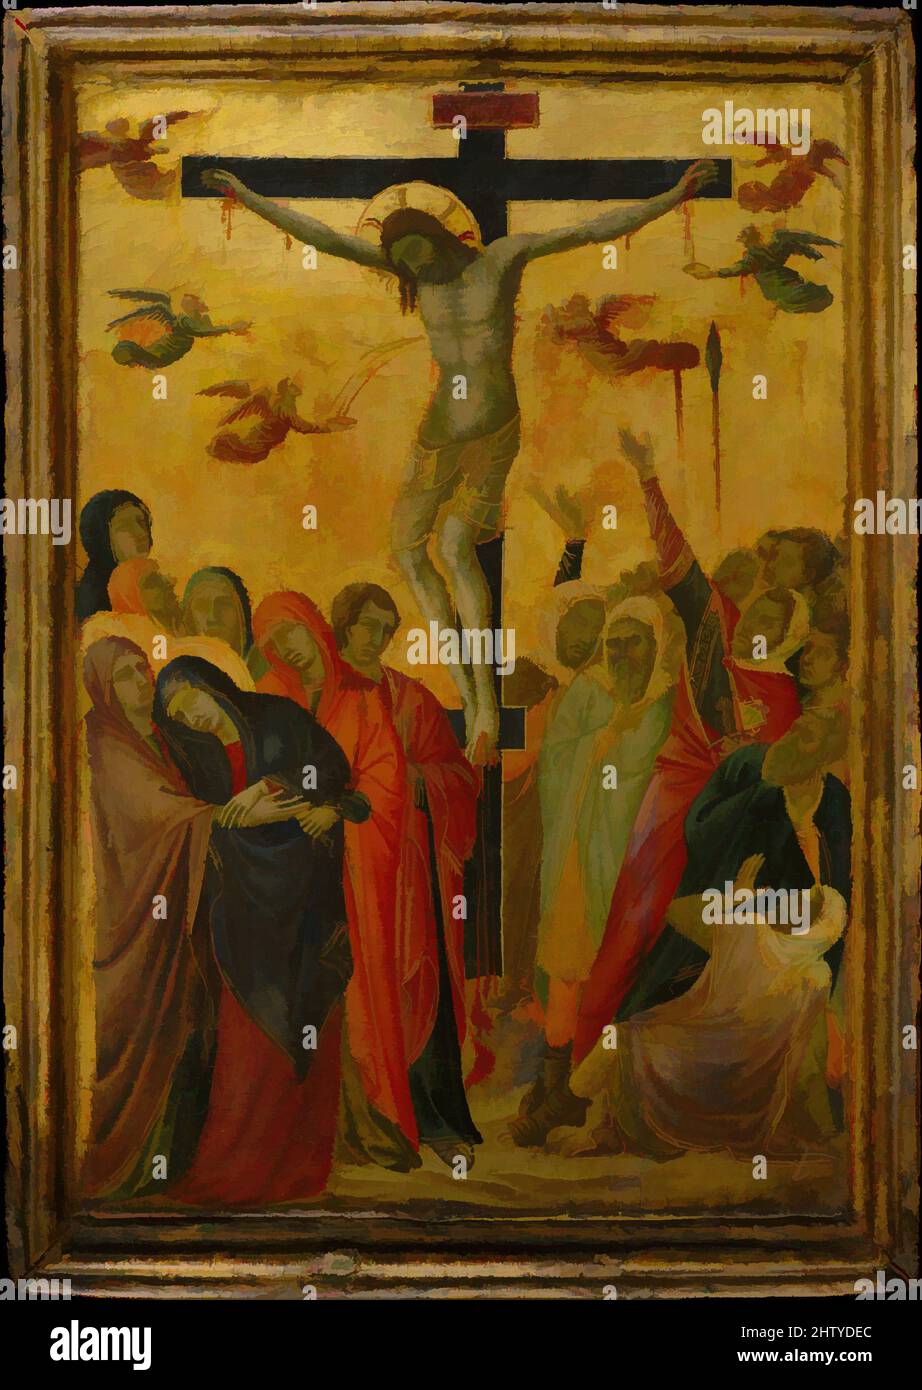 Art inspired by The Crucifixion, ca. 1315, Tempera on panel, Left wing, overall, with engaged frame, 15 1/8 x 10 5/8 in. (38.4 x 27 cm); right wing, overall, with engaged frame, 15 x 10 5/8 in. (38.1 x 27 cm), Paintings, Segna di Buonaventura (Italian, active Siena by 1298–died 1326/31, Classic works modernized by Artotop with a splash of modernity. Shapes, color and value, eye-catching visual impact on art. Emotions through freedom of artworks in a contemporary way. A timeless message pursuing a wildly creative new direction. Artists turning to the digital medium and creating the Artotop NFT Stock Photo